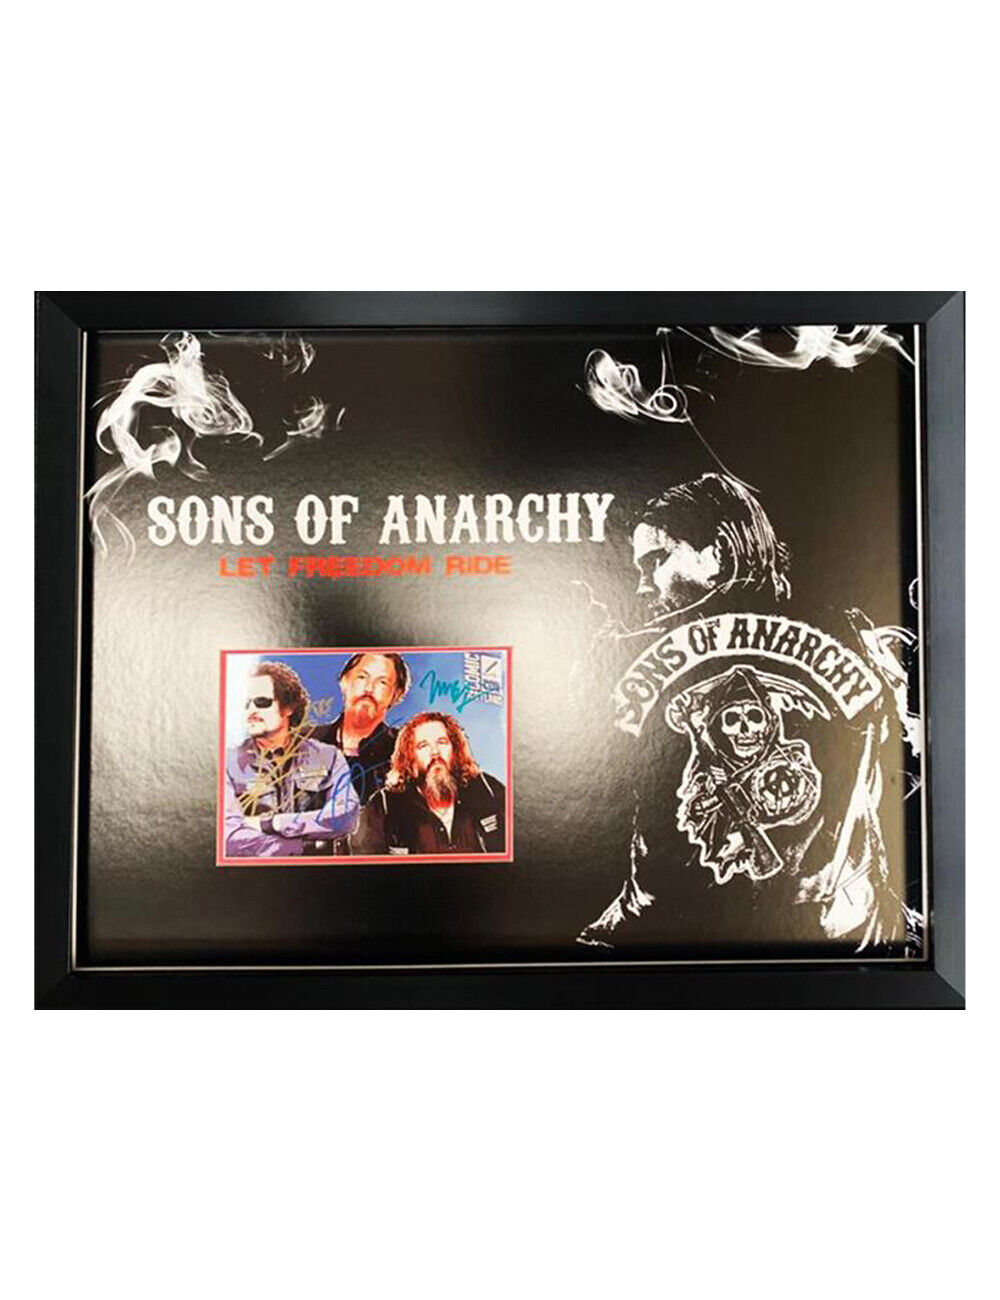 Framed Sons Of Anarchy Print Signed by Coates, Flanagan & Boone Jr. 100% + COA